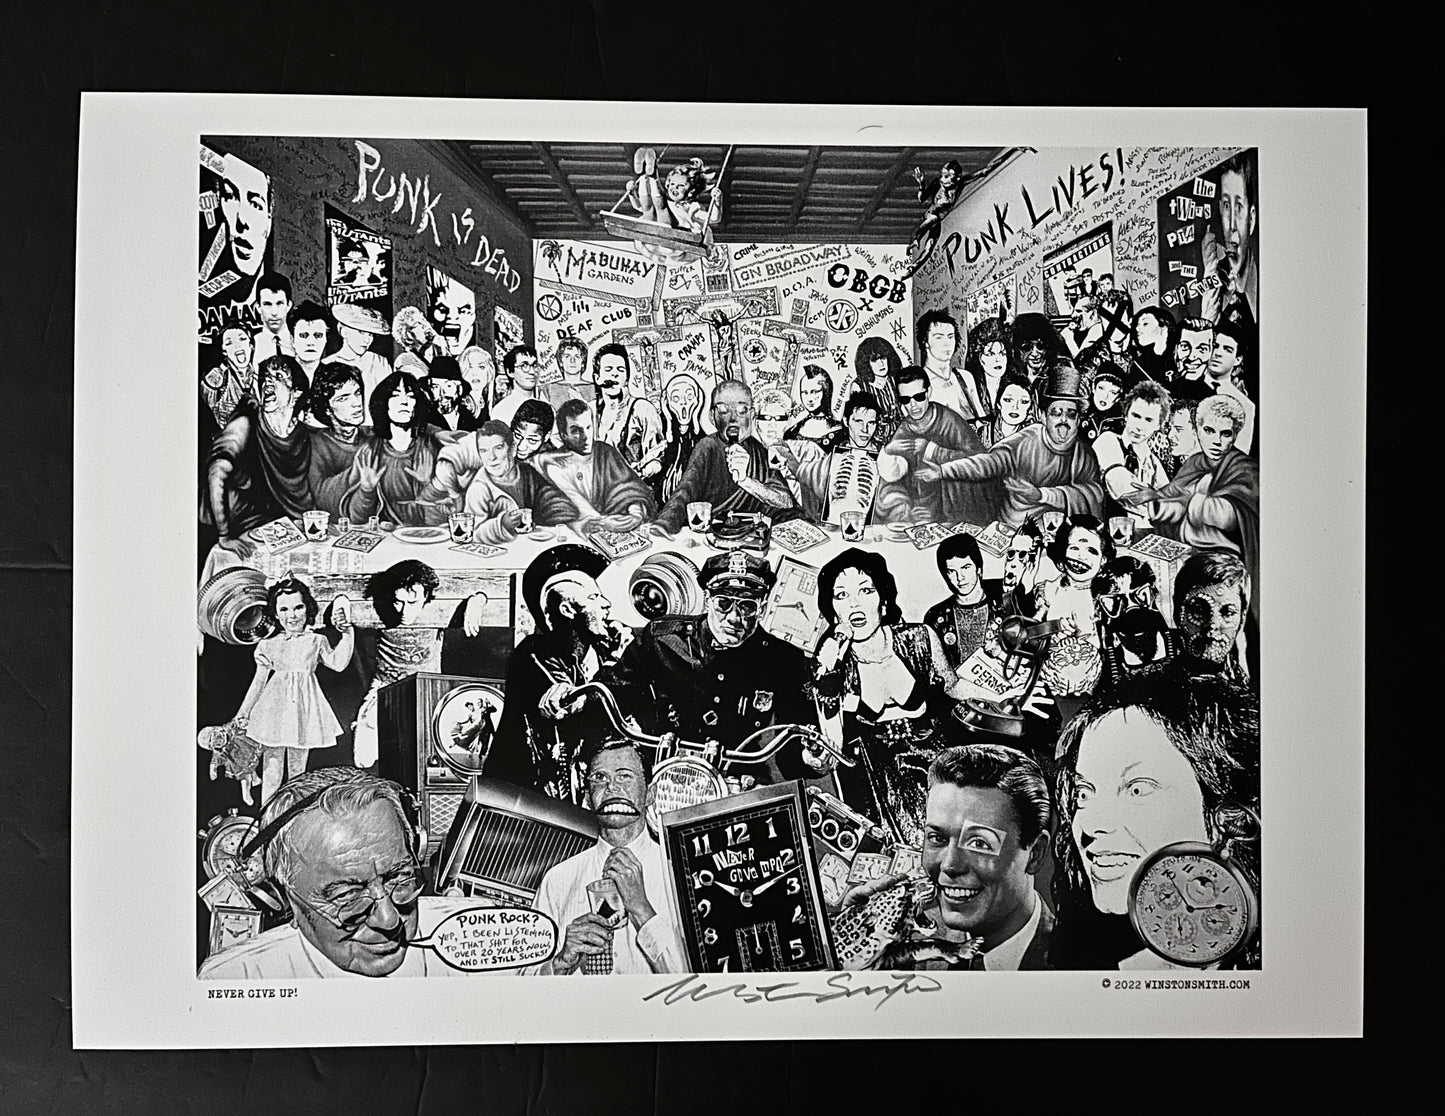 Winston Smith "Never Give Up" Print